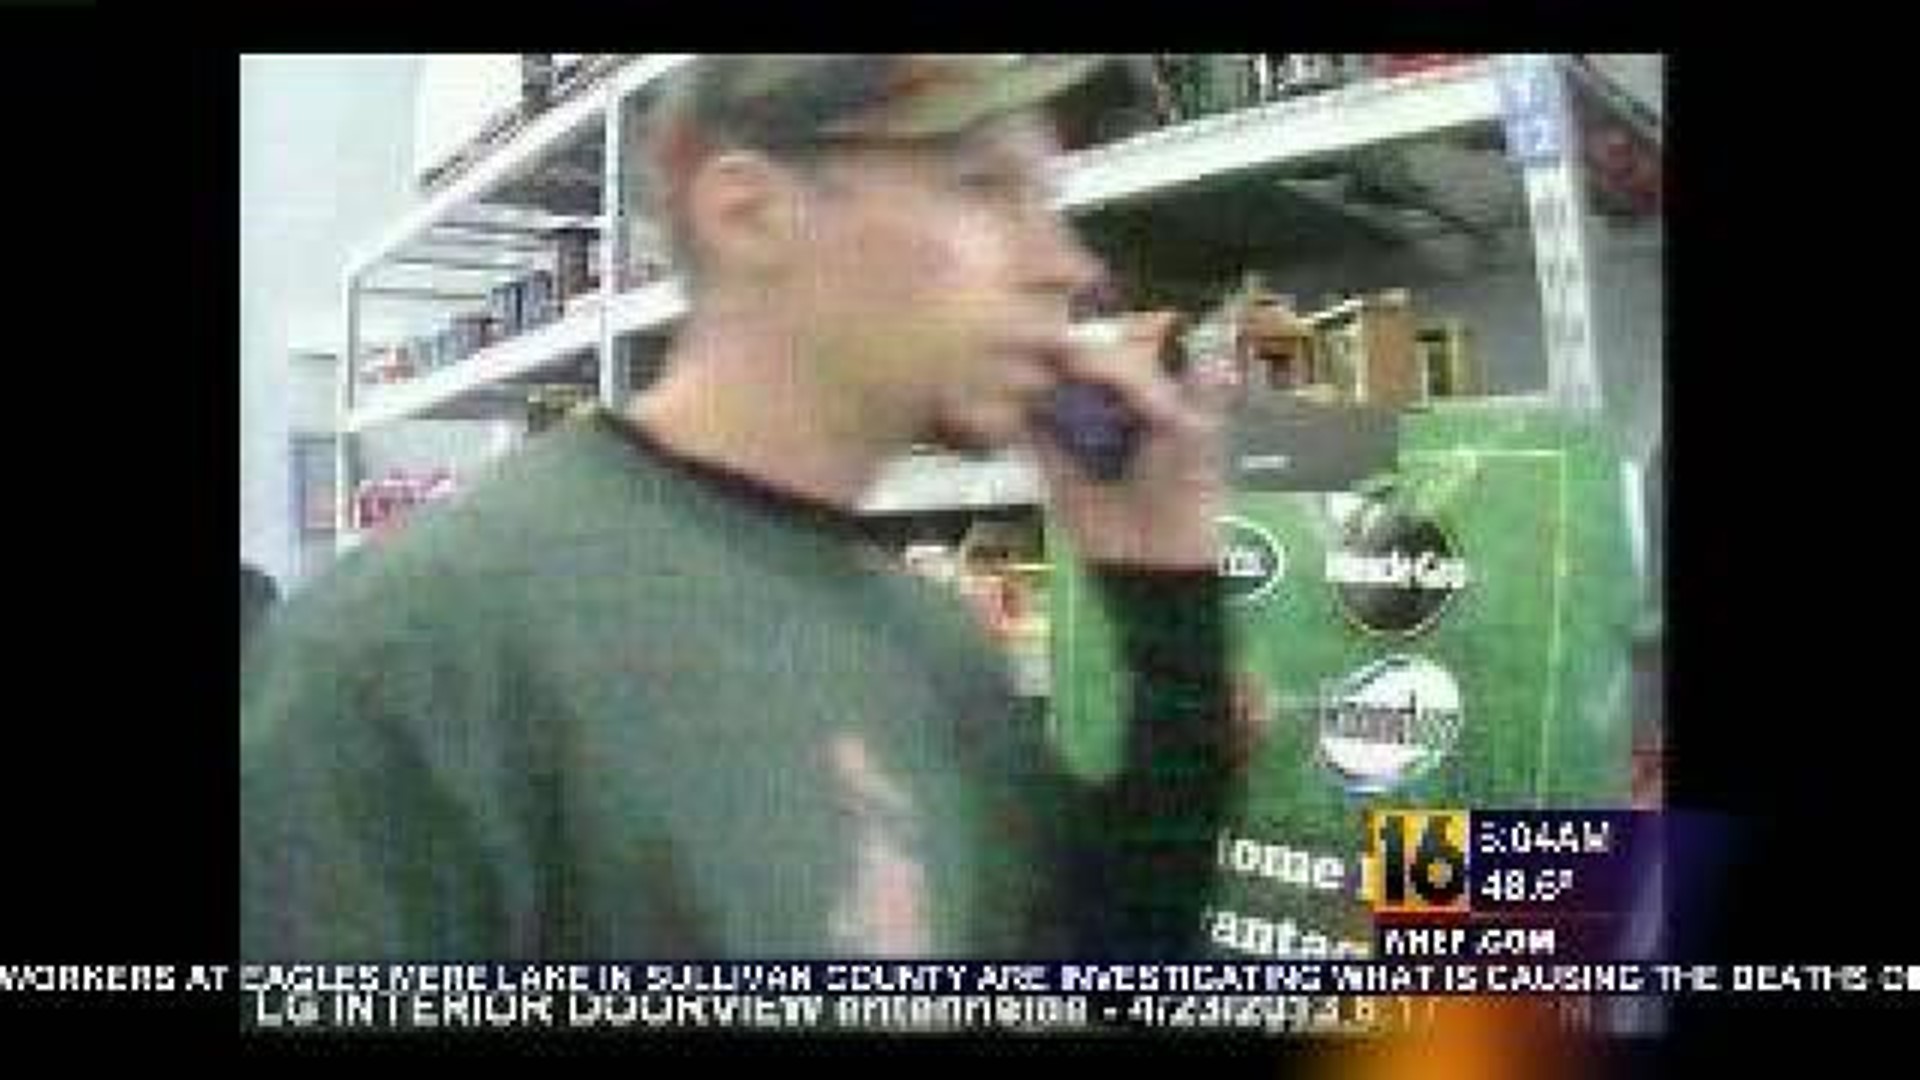 Men Caught On Camera Allegedly Stealing From Walmart